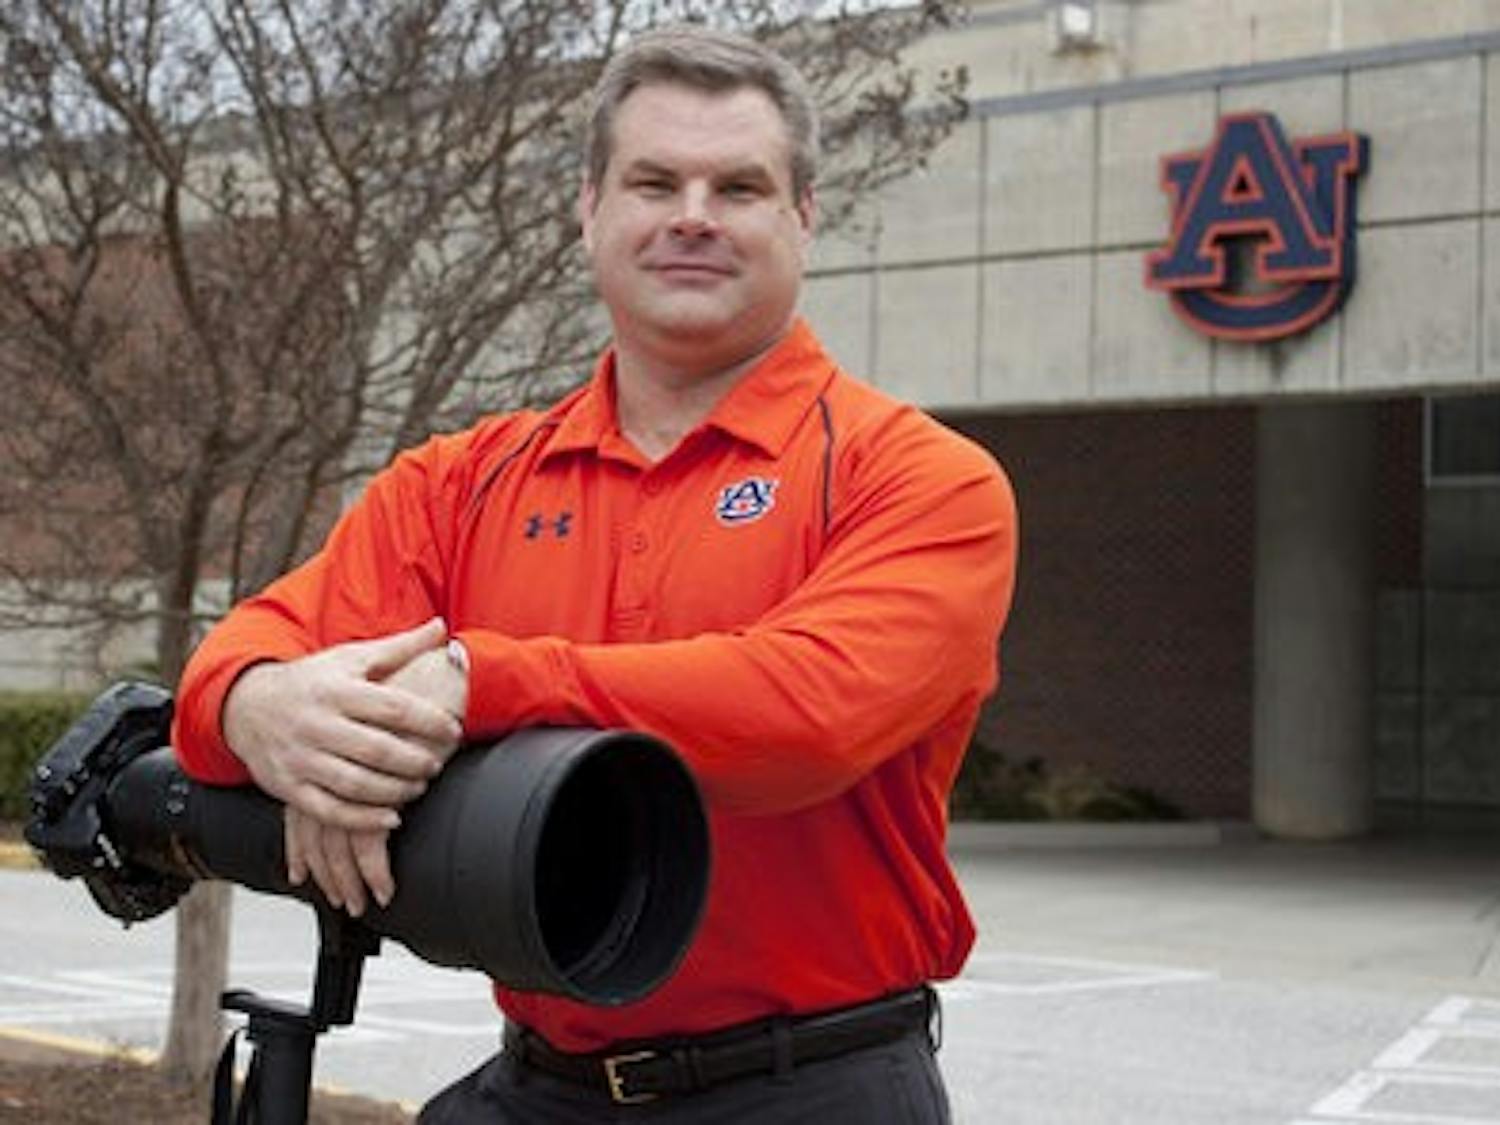 Todd Van Emst, athletic department photographer, stands with his Nikon camera and 400mm lens outside the athletic complex. (Emily Adams/PHOTO EDITOR)